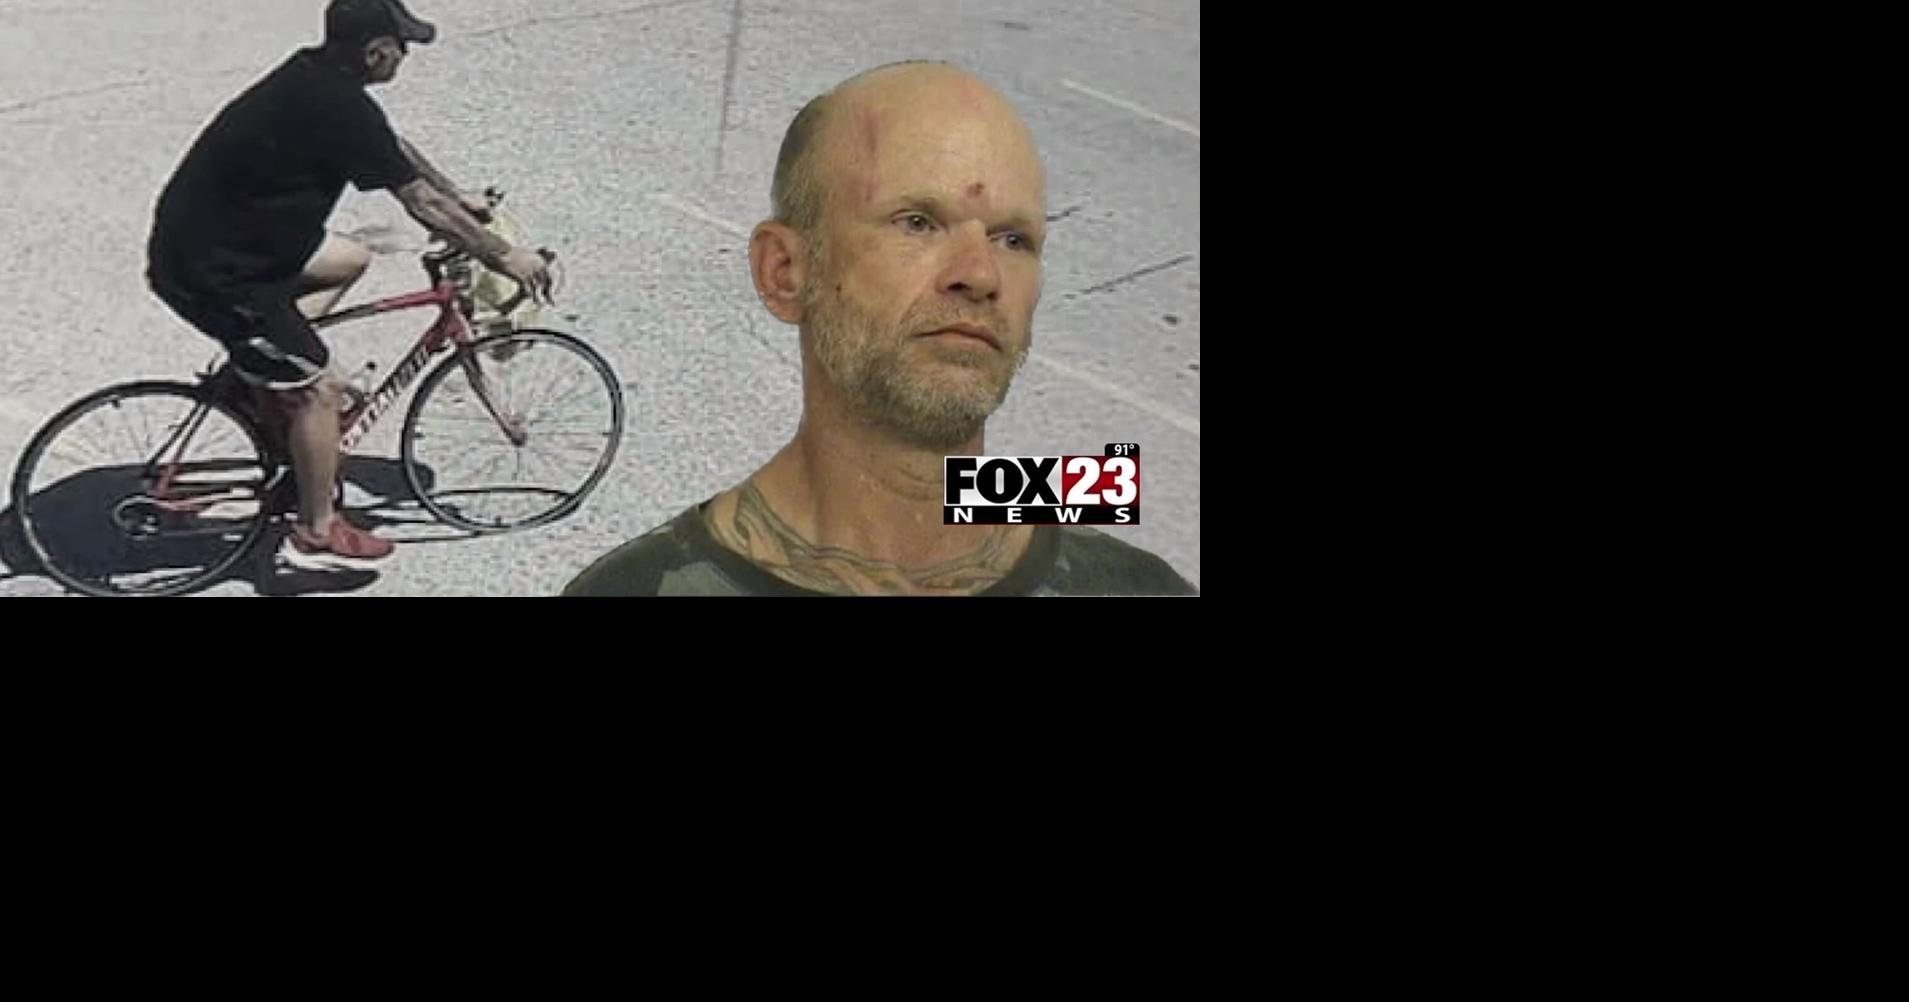 Video Tulsa County Deputies Still Searching For Man Who Beat Woman News 0743